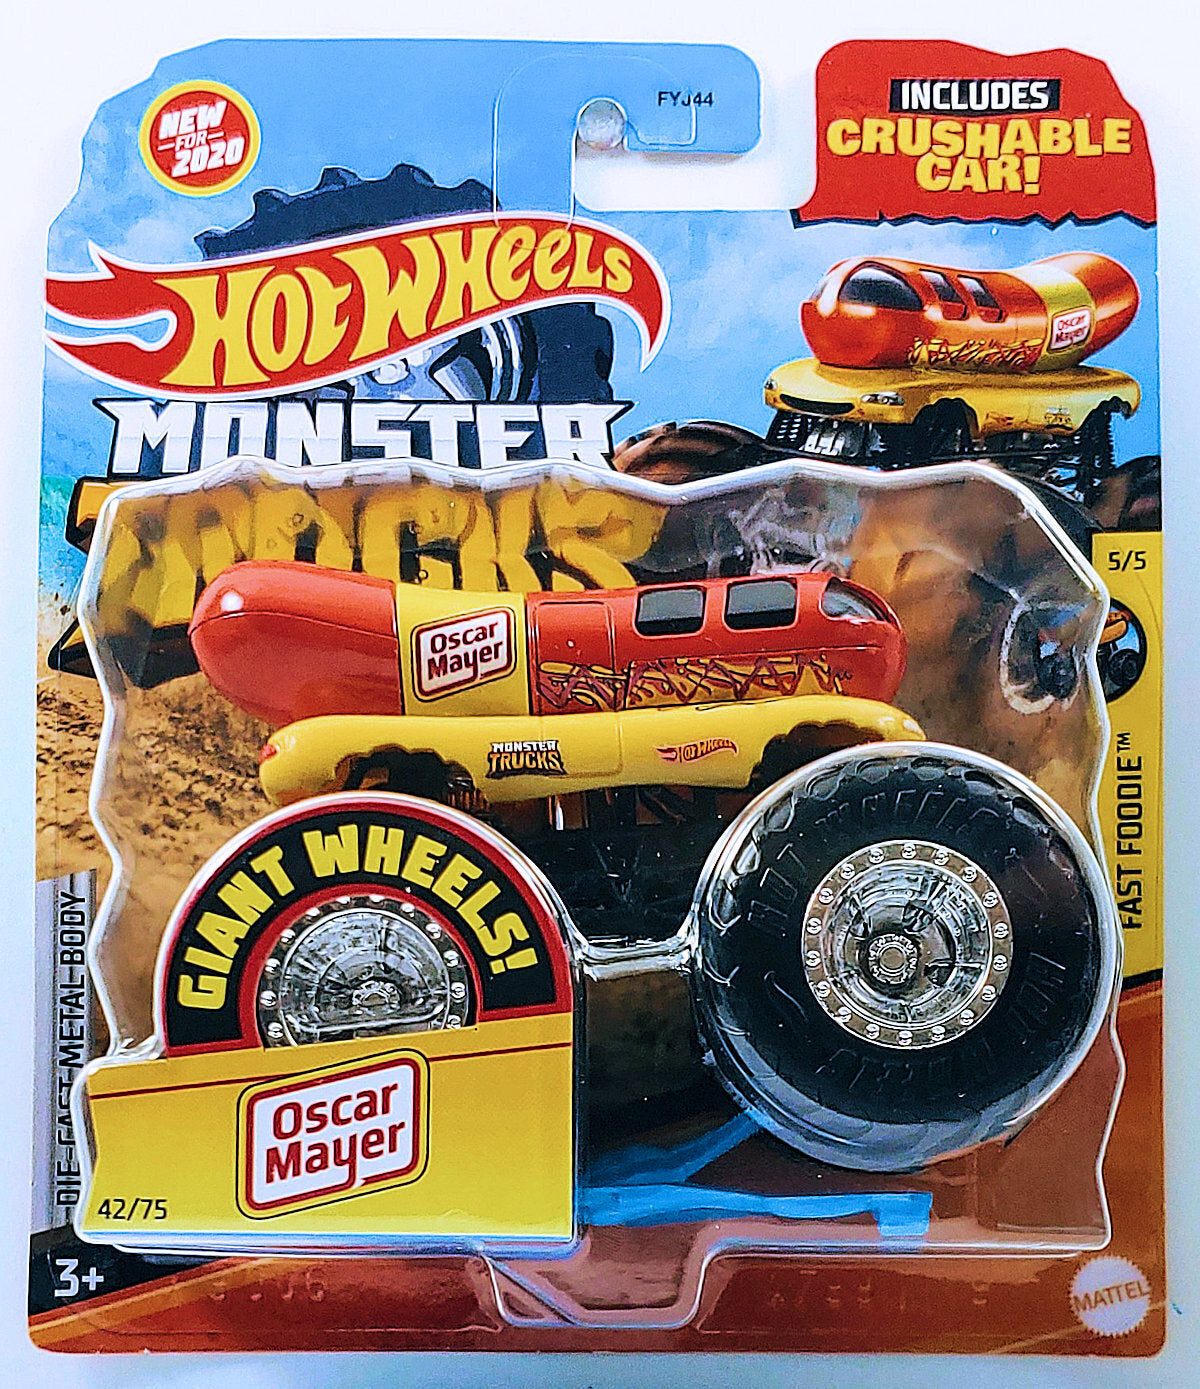 Hot Wheels 2020 - Monster Trucks 42/75 - Oscar Mayer (Wienermobile) - Yellow & Orange Red - Giant Wheels - Includes Crushable Car